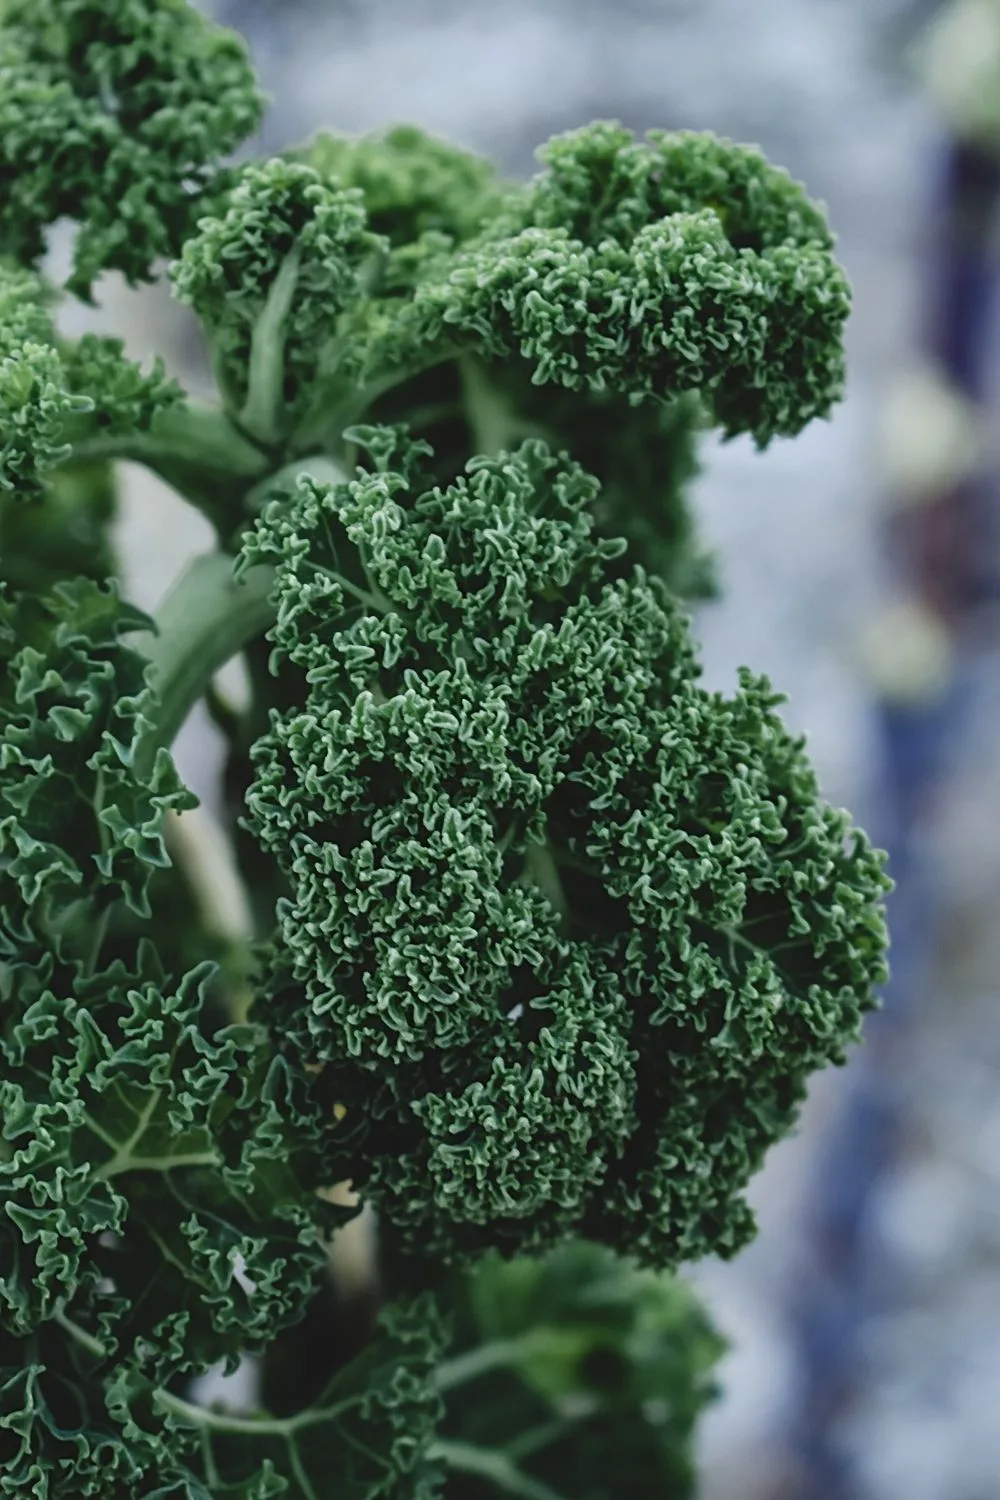 Kale is not only a leafy vegetable, but it also is an ornamental plant you can grow in your northeast-facing garden